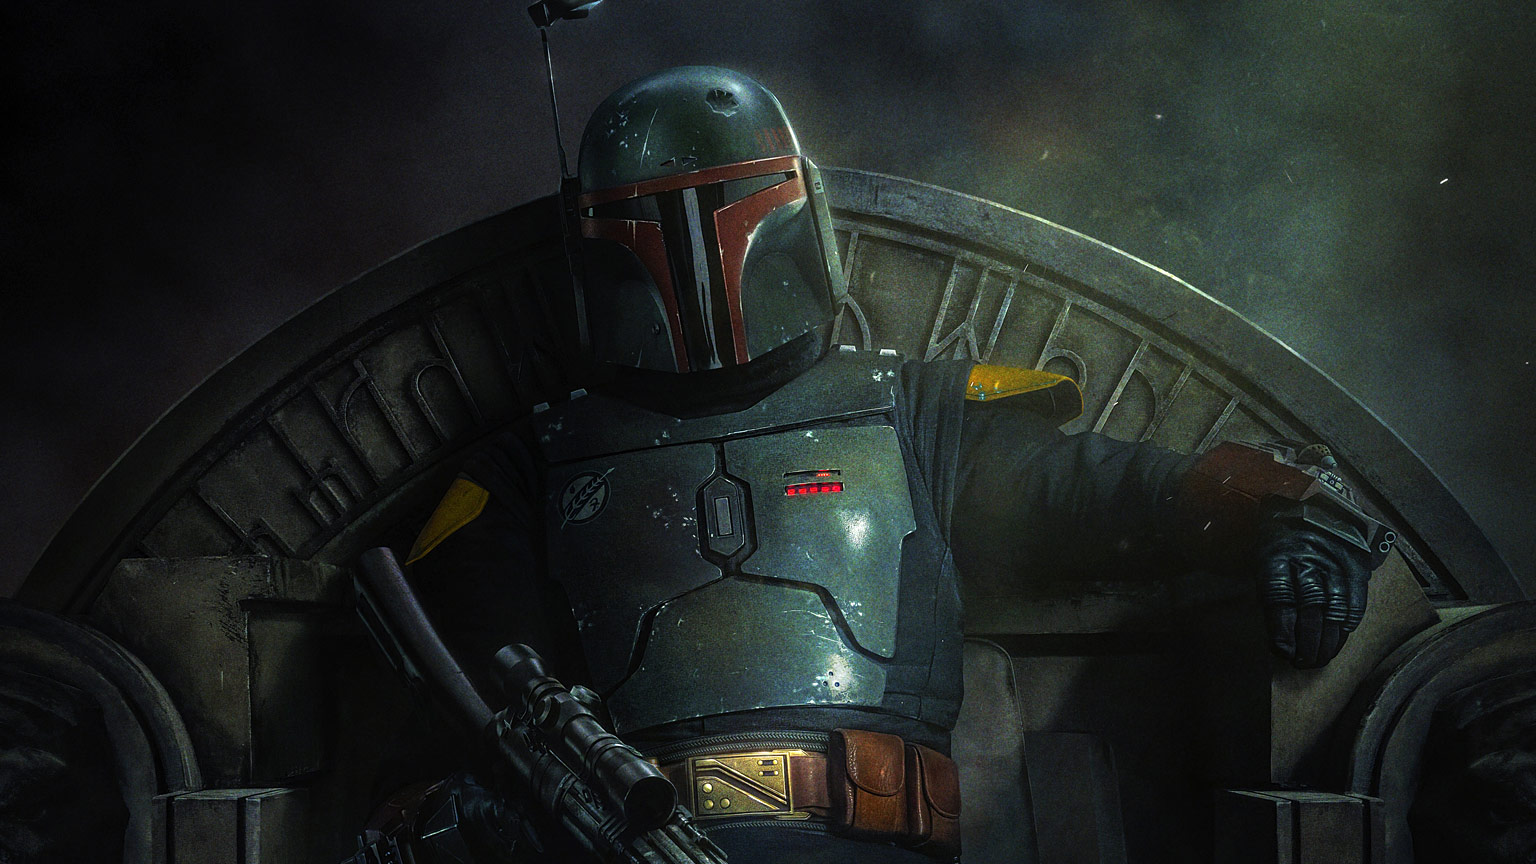 Disney+ Day Boba Fett Documentary Gets A Title In Latest Promo